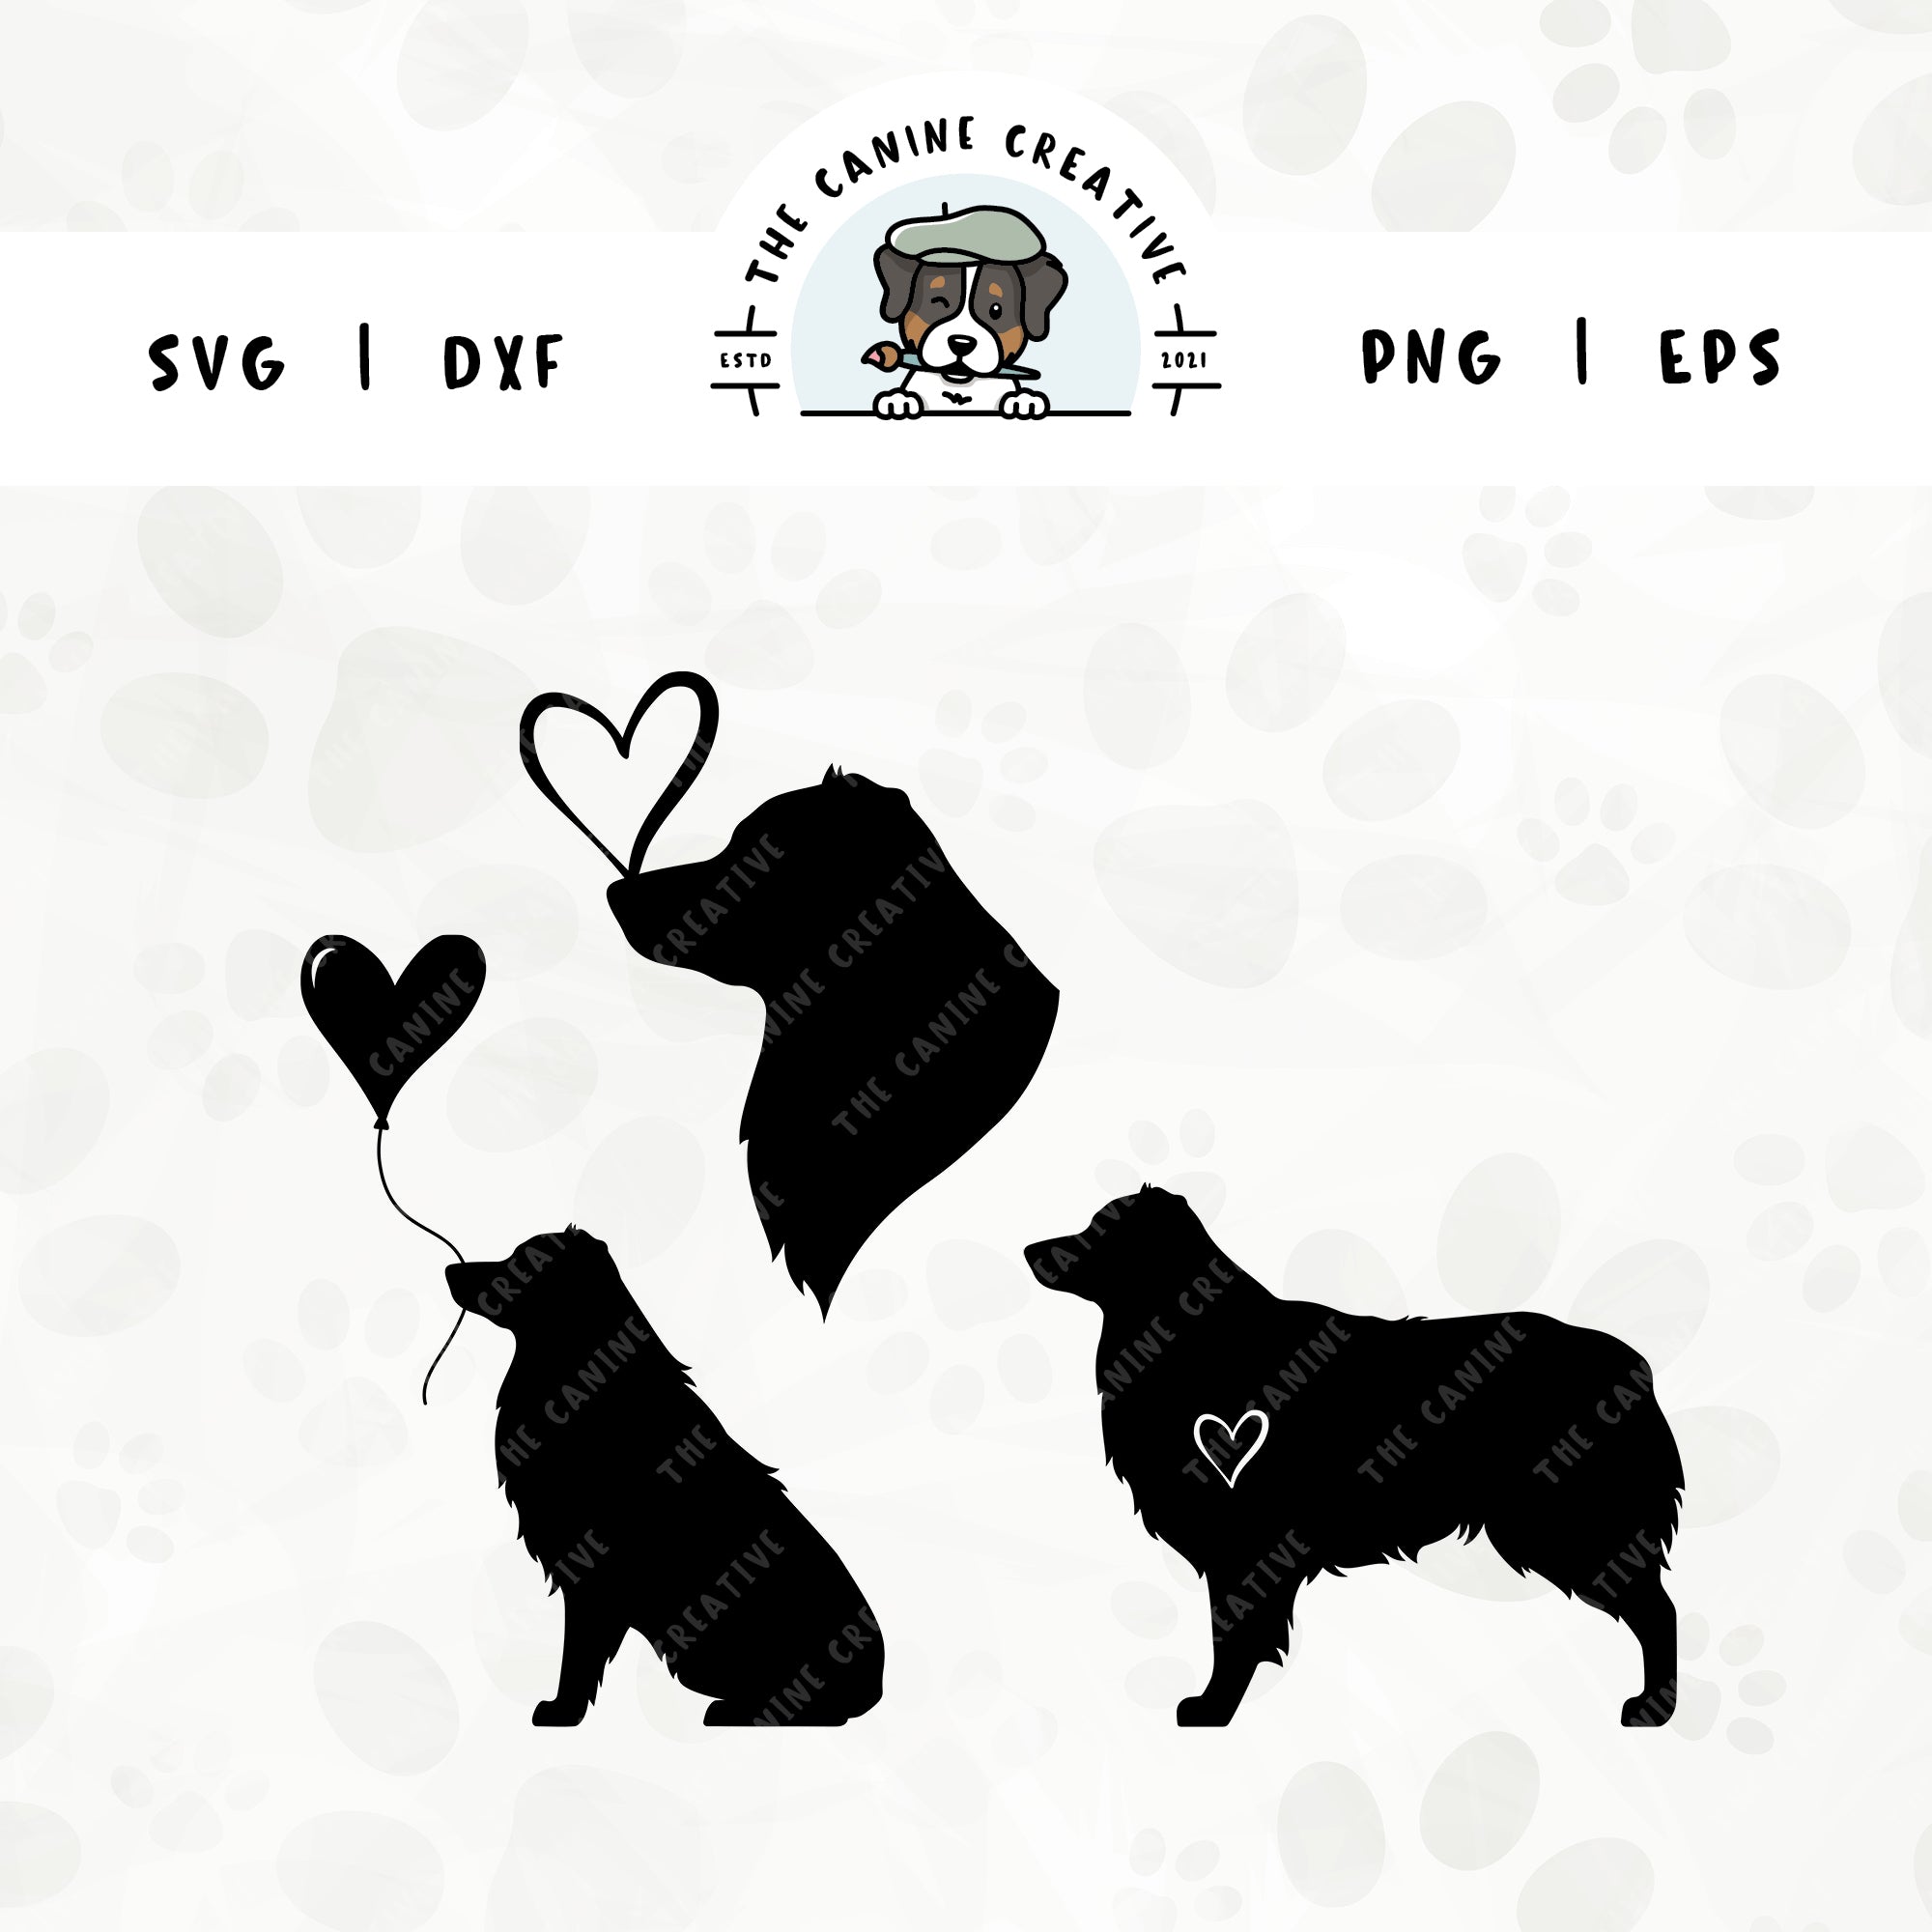 This 3-pack, docked tail Australian Shepherd silhouette bundle features a head portrait of a dog with a heart perched atop it’s nose, a sitting dog holding a heart balloon, and a standing profile of a dog with a heart inset. File formats include: SVG, DXF, PNG, and EPS.